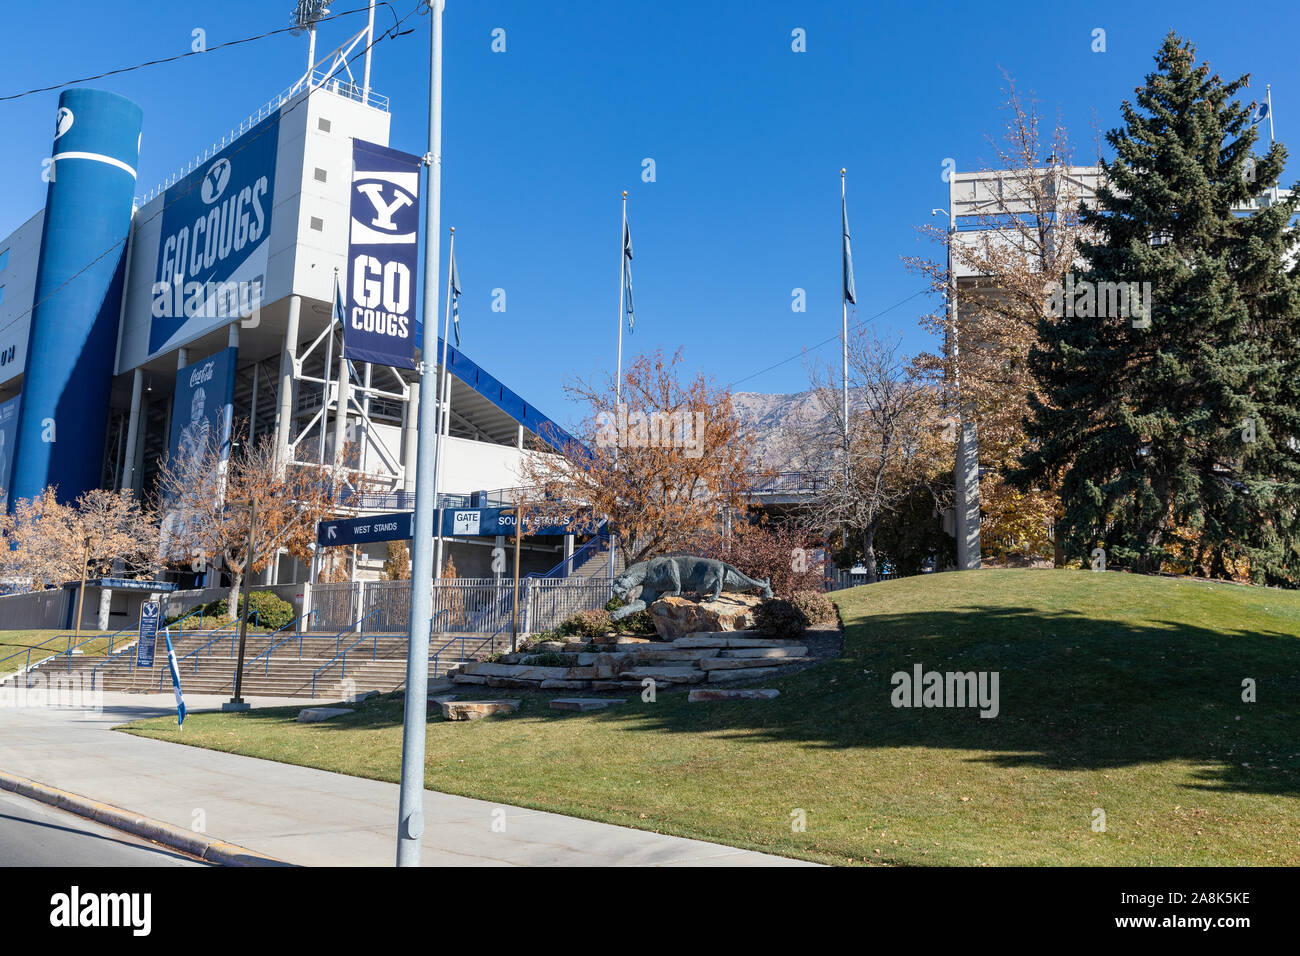 November 9, 2019 - Provo, UT, USA: Lavell Edwards Stadium on the campus of Brigham Young University, primarily used for college football Stock Photo